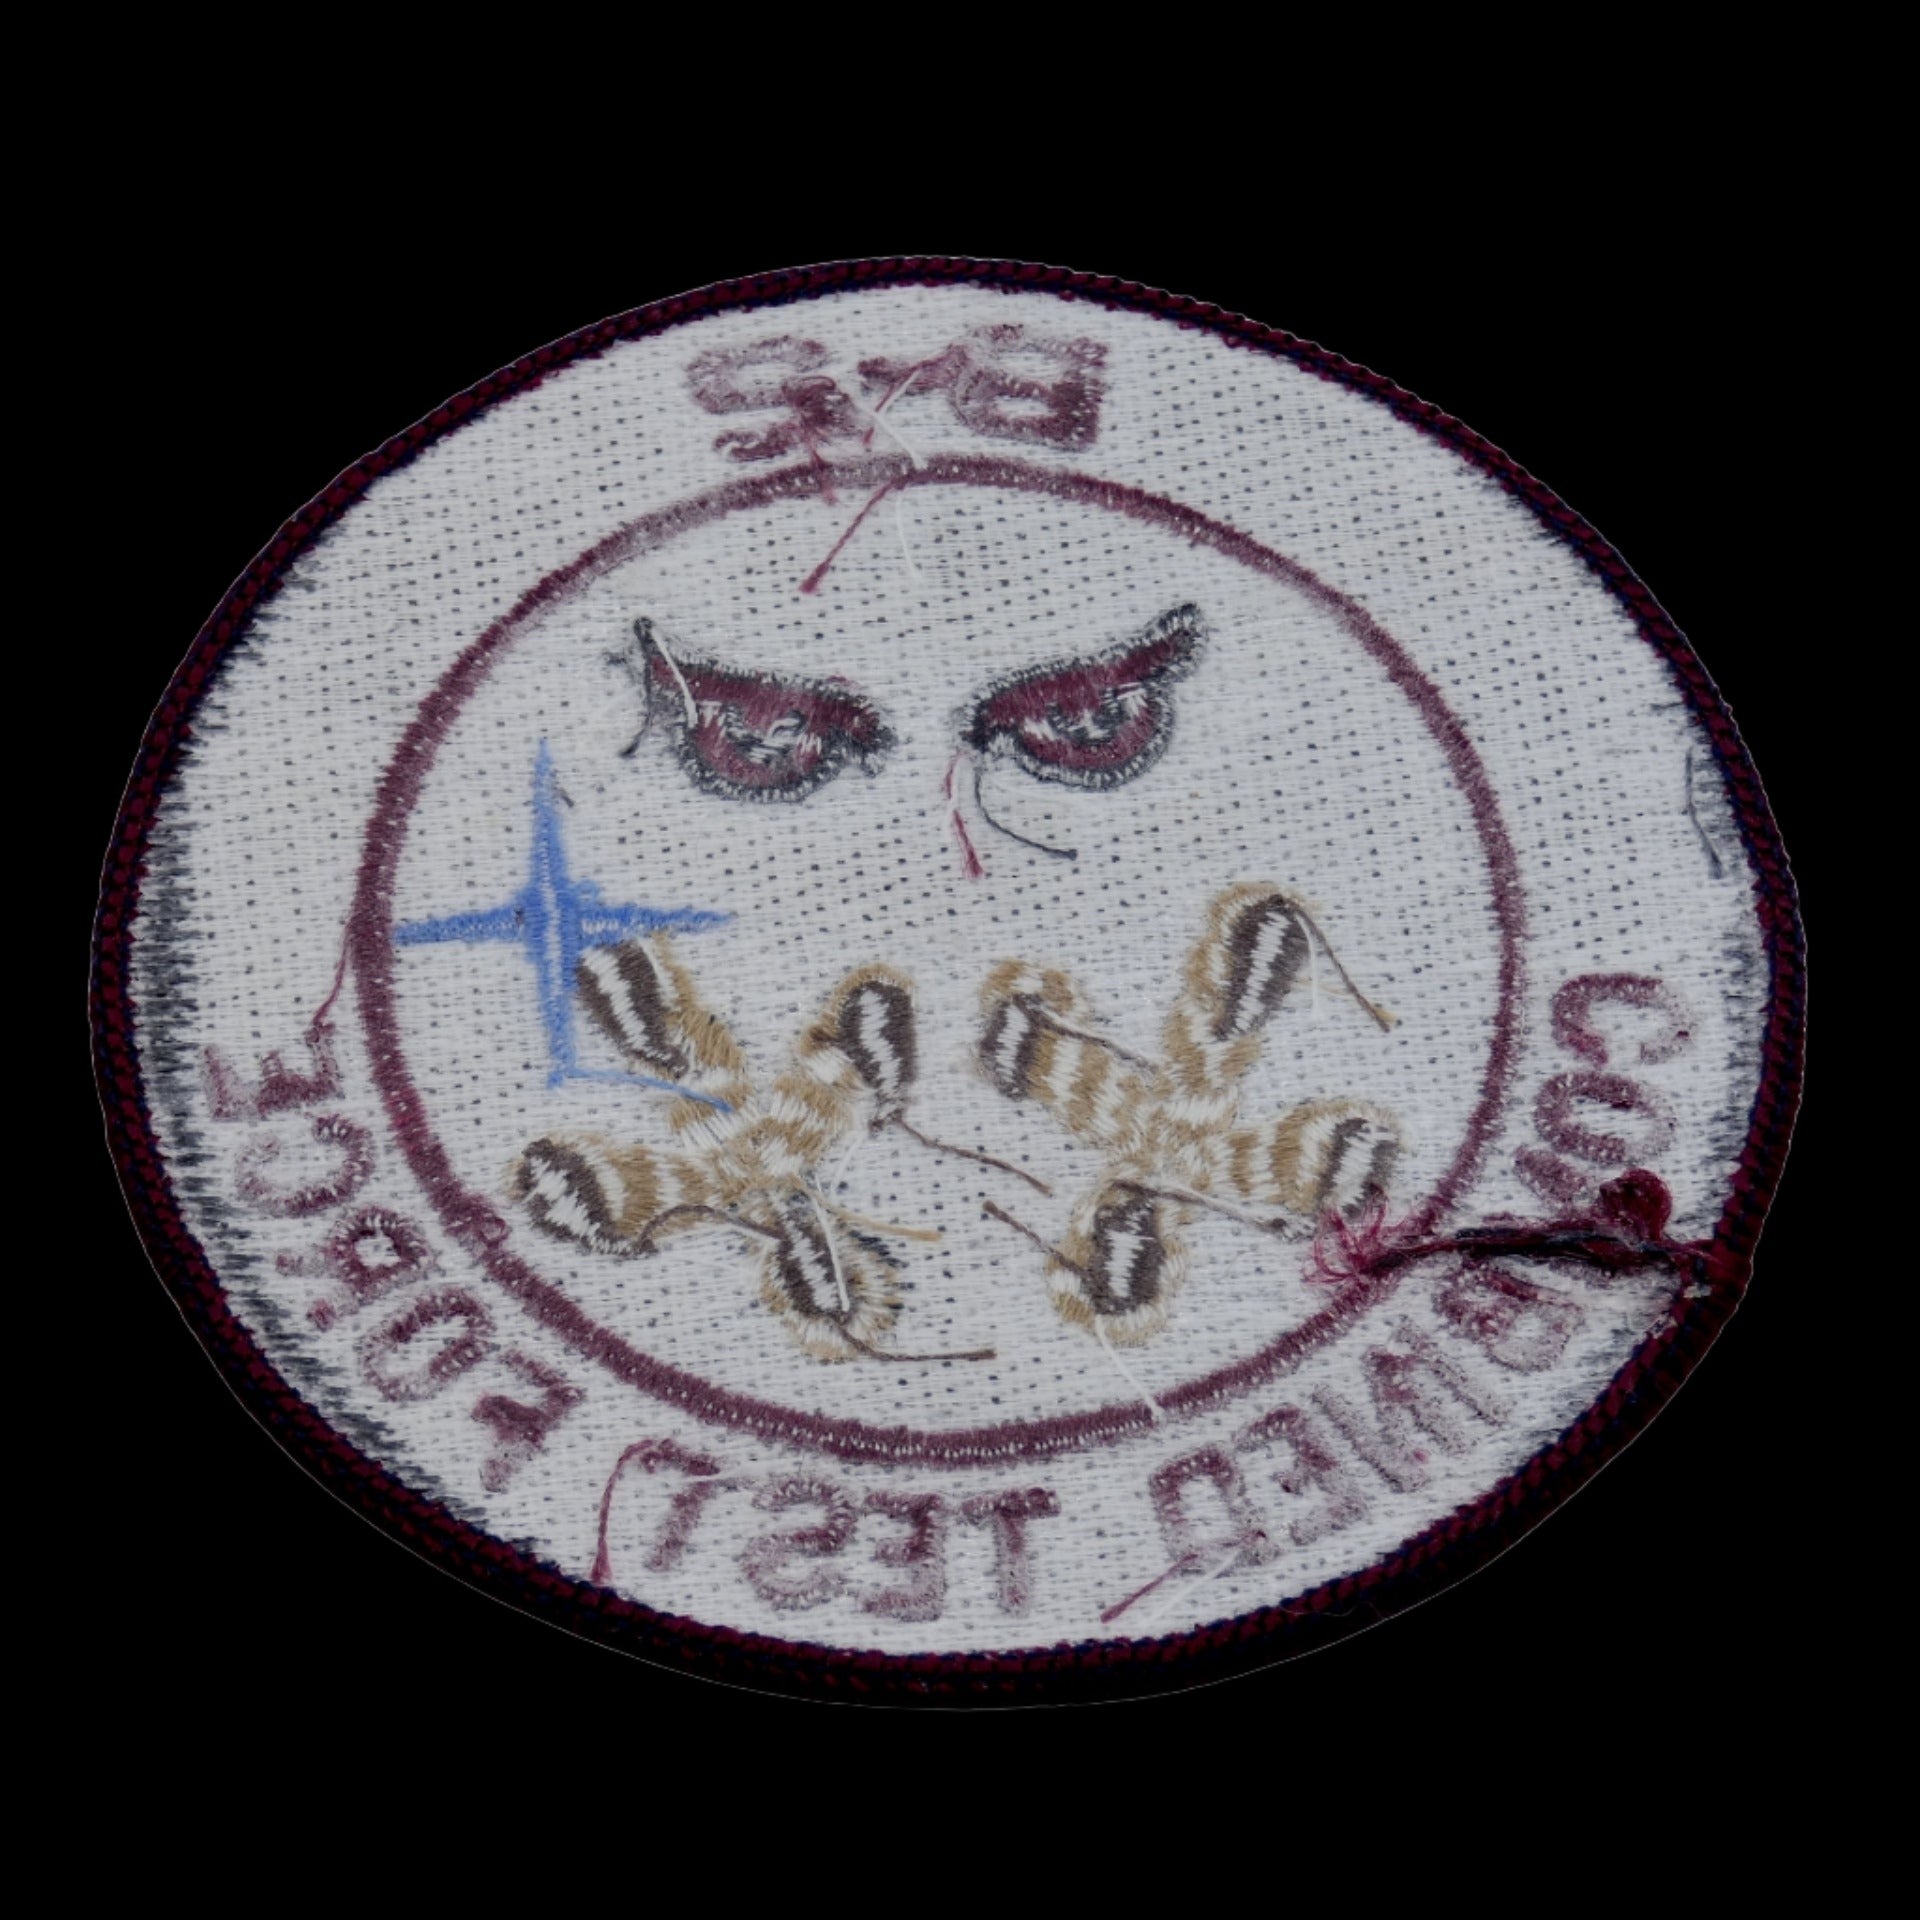 Military Memorabilia - B-2 Bomber Test Force Patch back